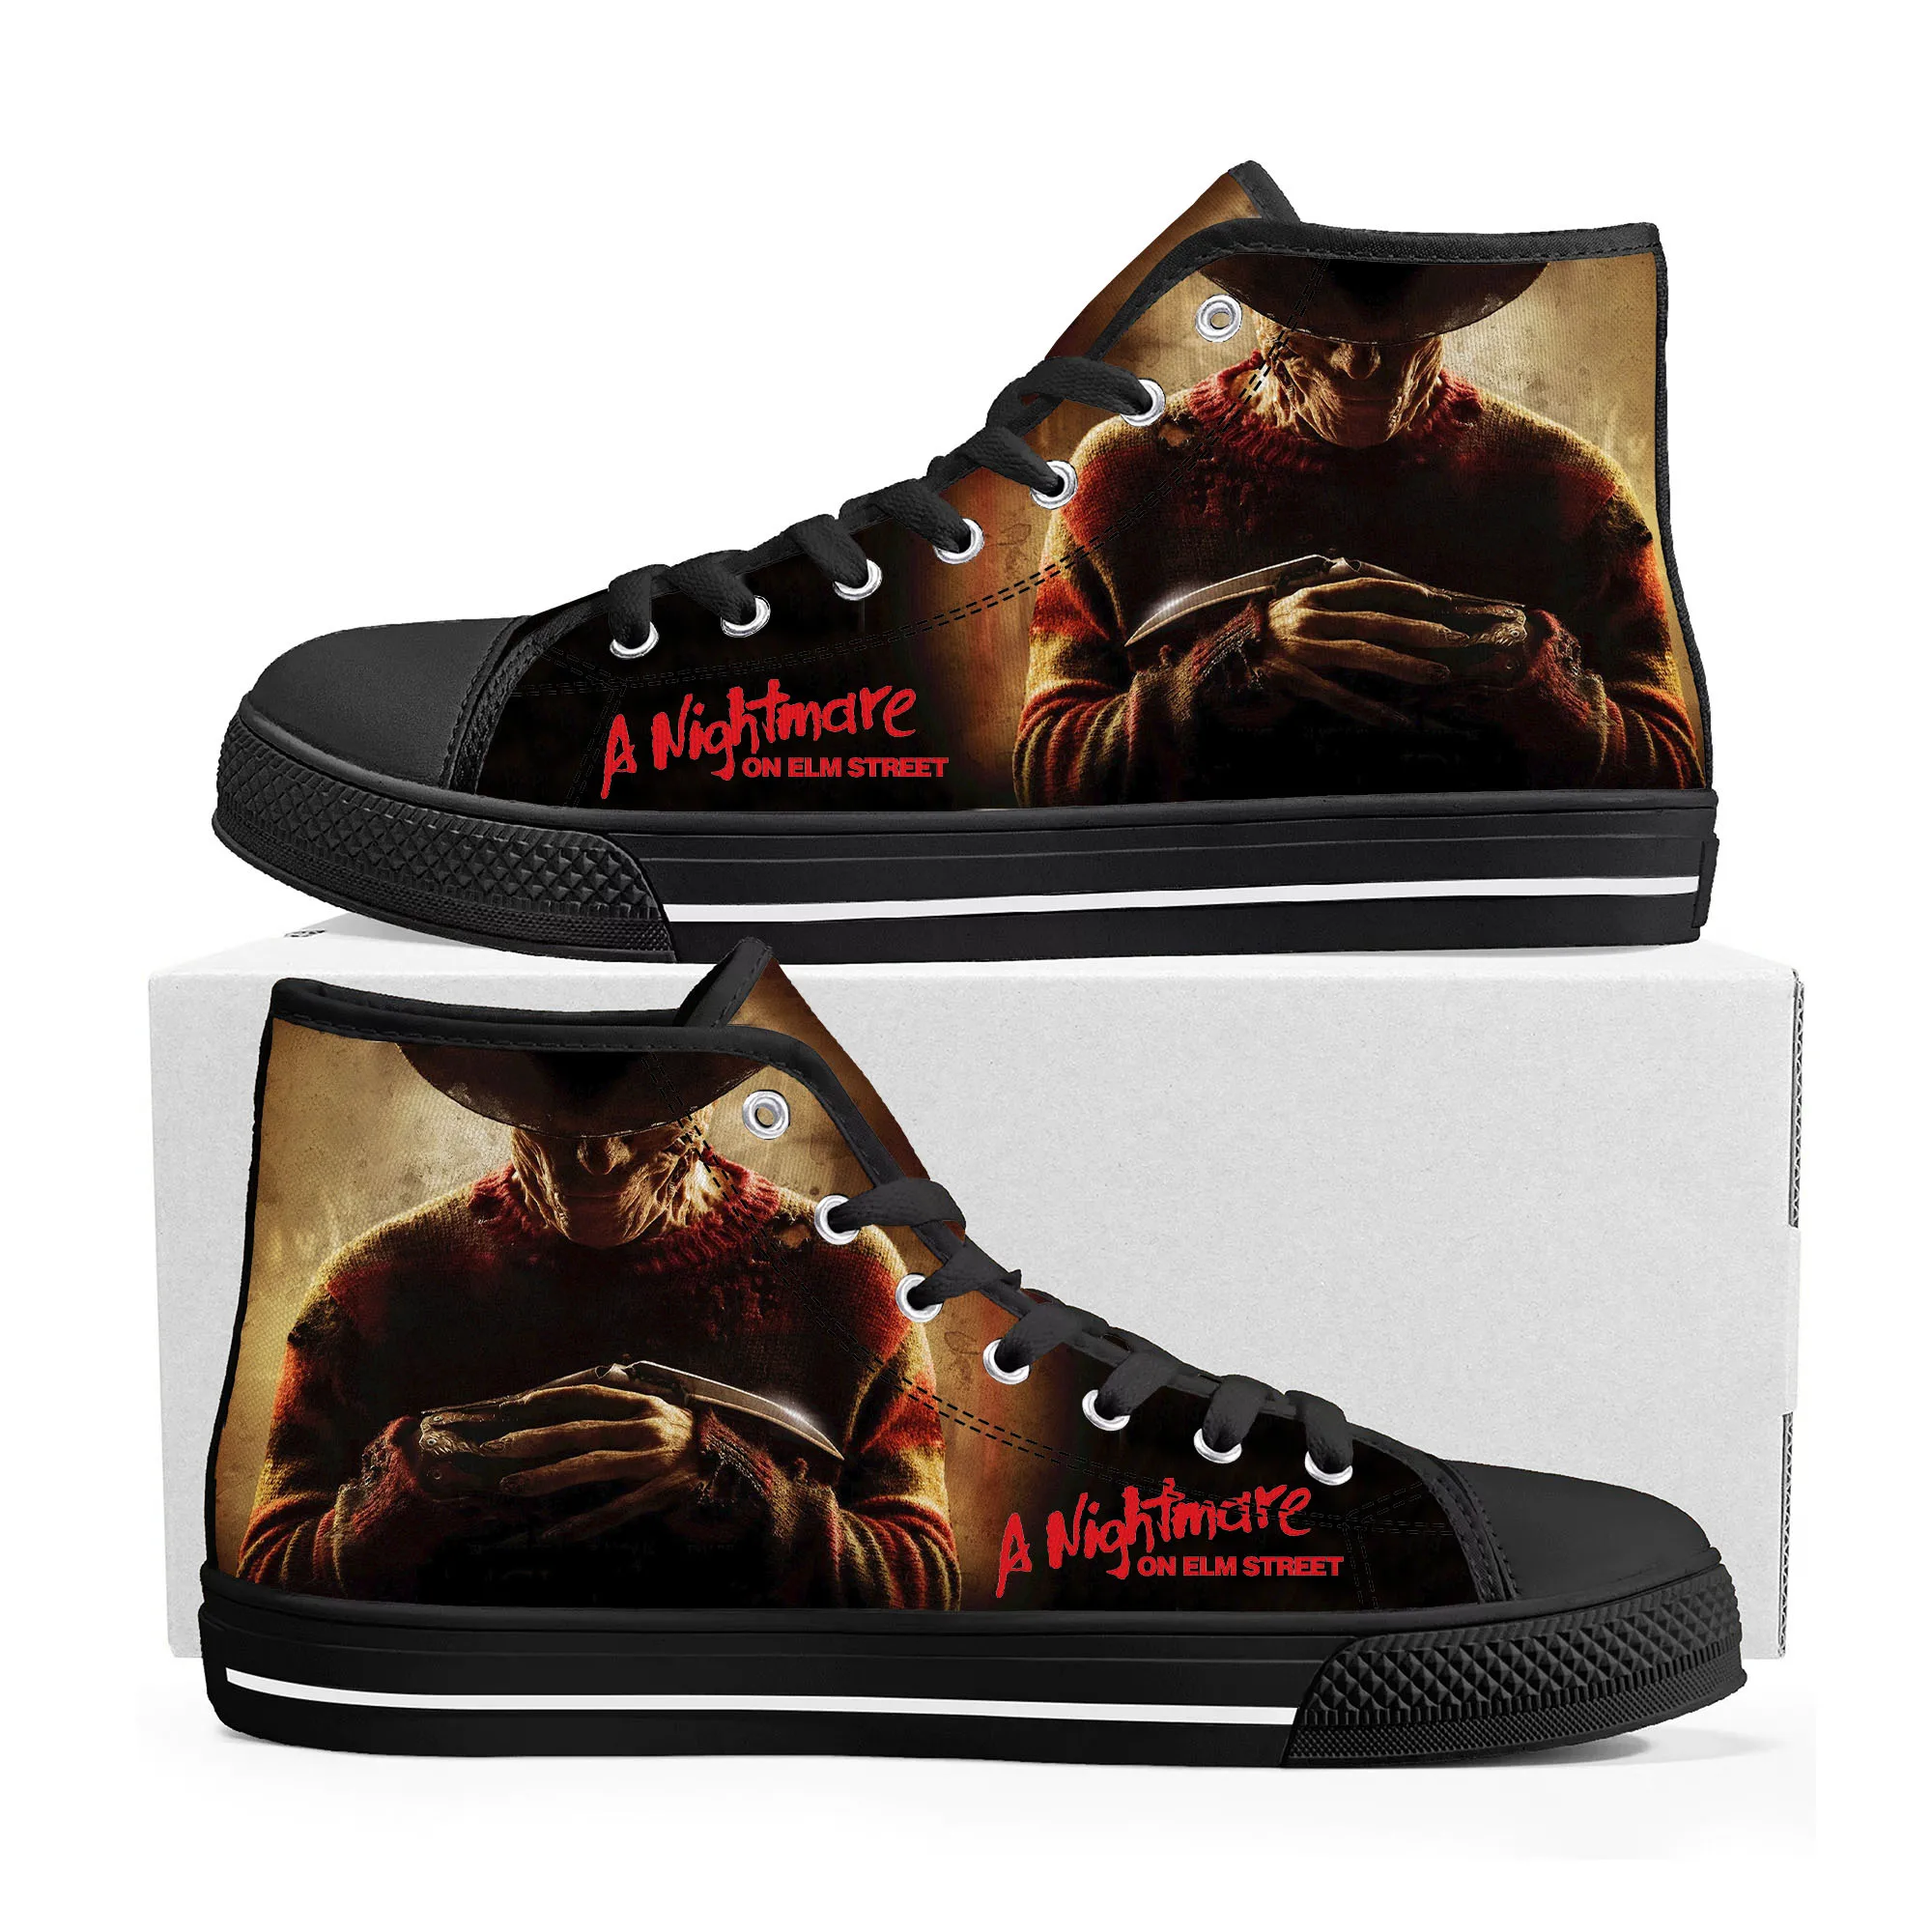 

A Nightmare on Elm Street High Top Sneakers Men Women Teenager High Quality Canvas Sneaker couple Shoe Casual Custom Made Shoes